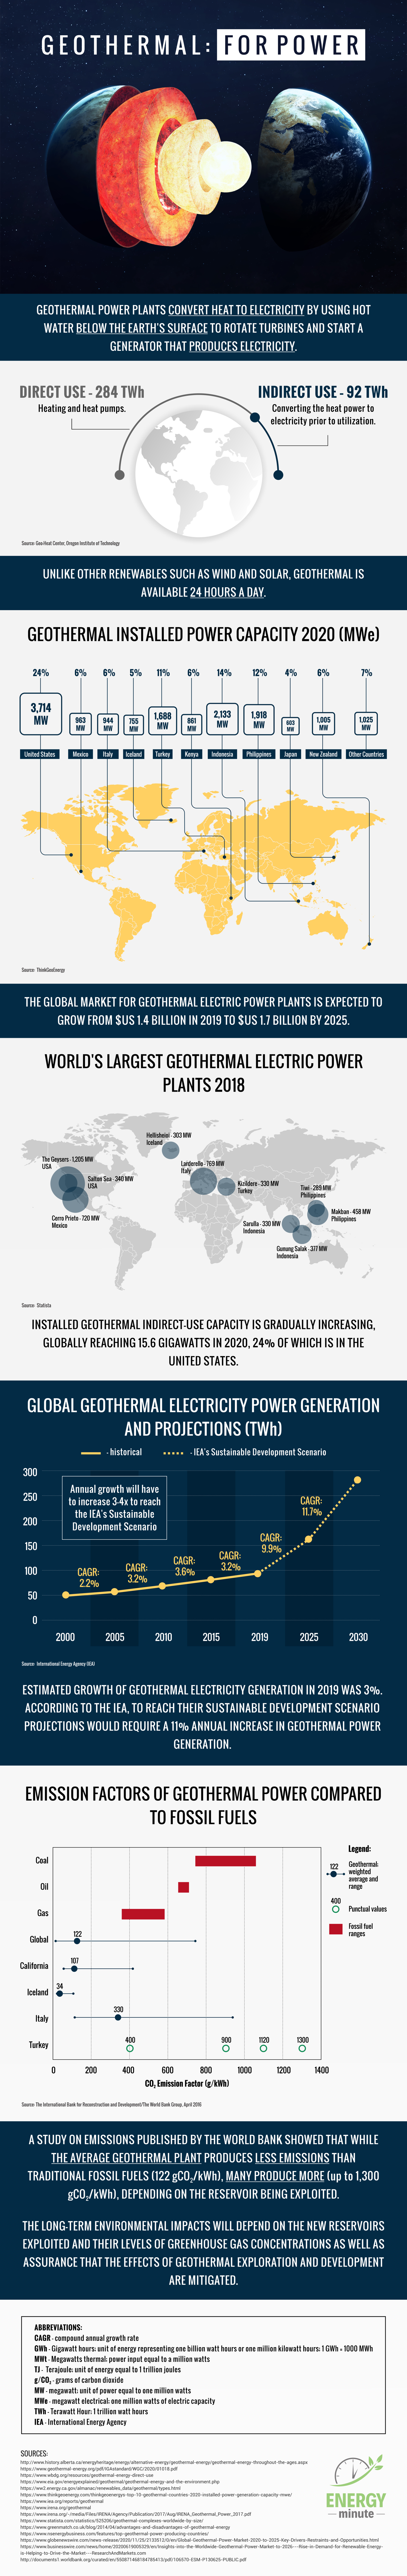 Geothermal for Power Generation